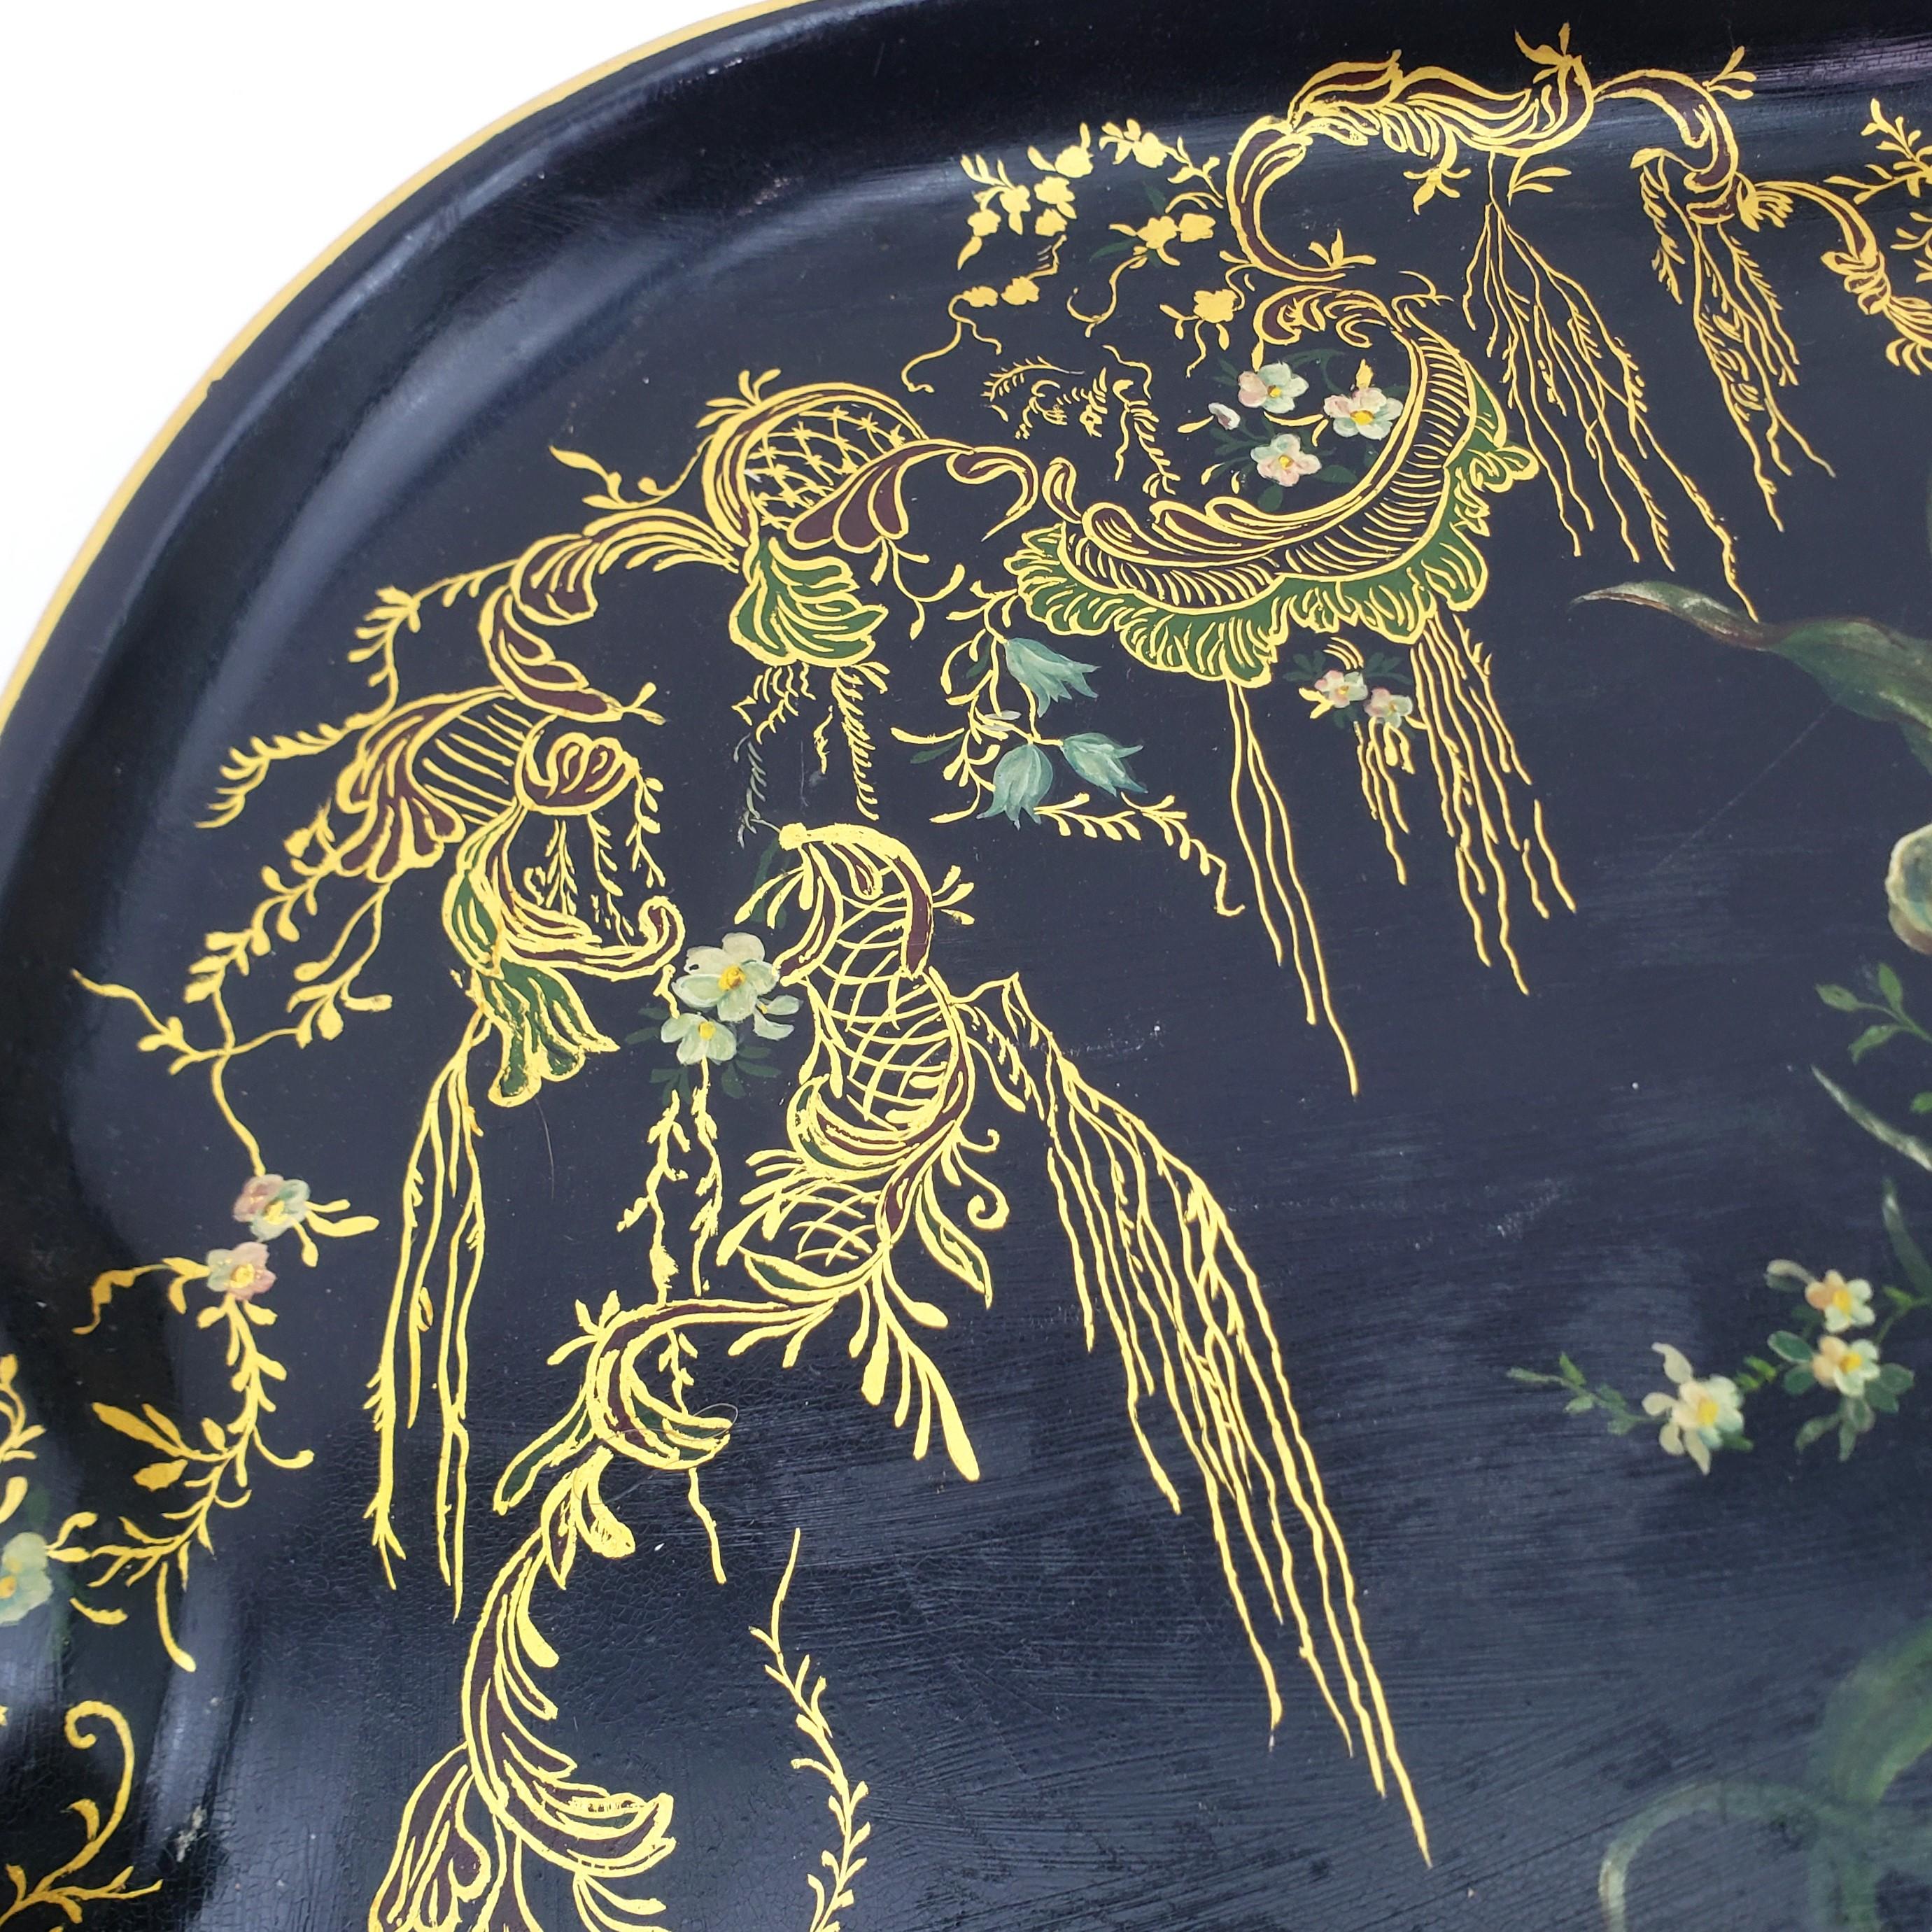 Steel Large Antique Toleware Serving Tray with Floral Decoration & Gilt Accents For Sale